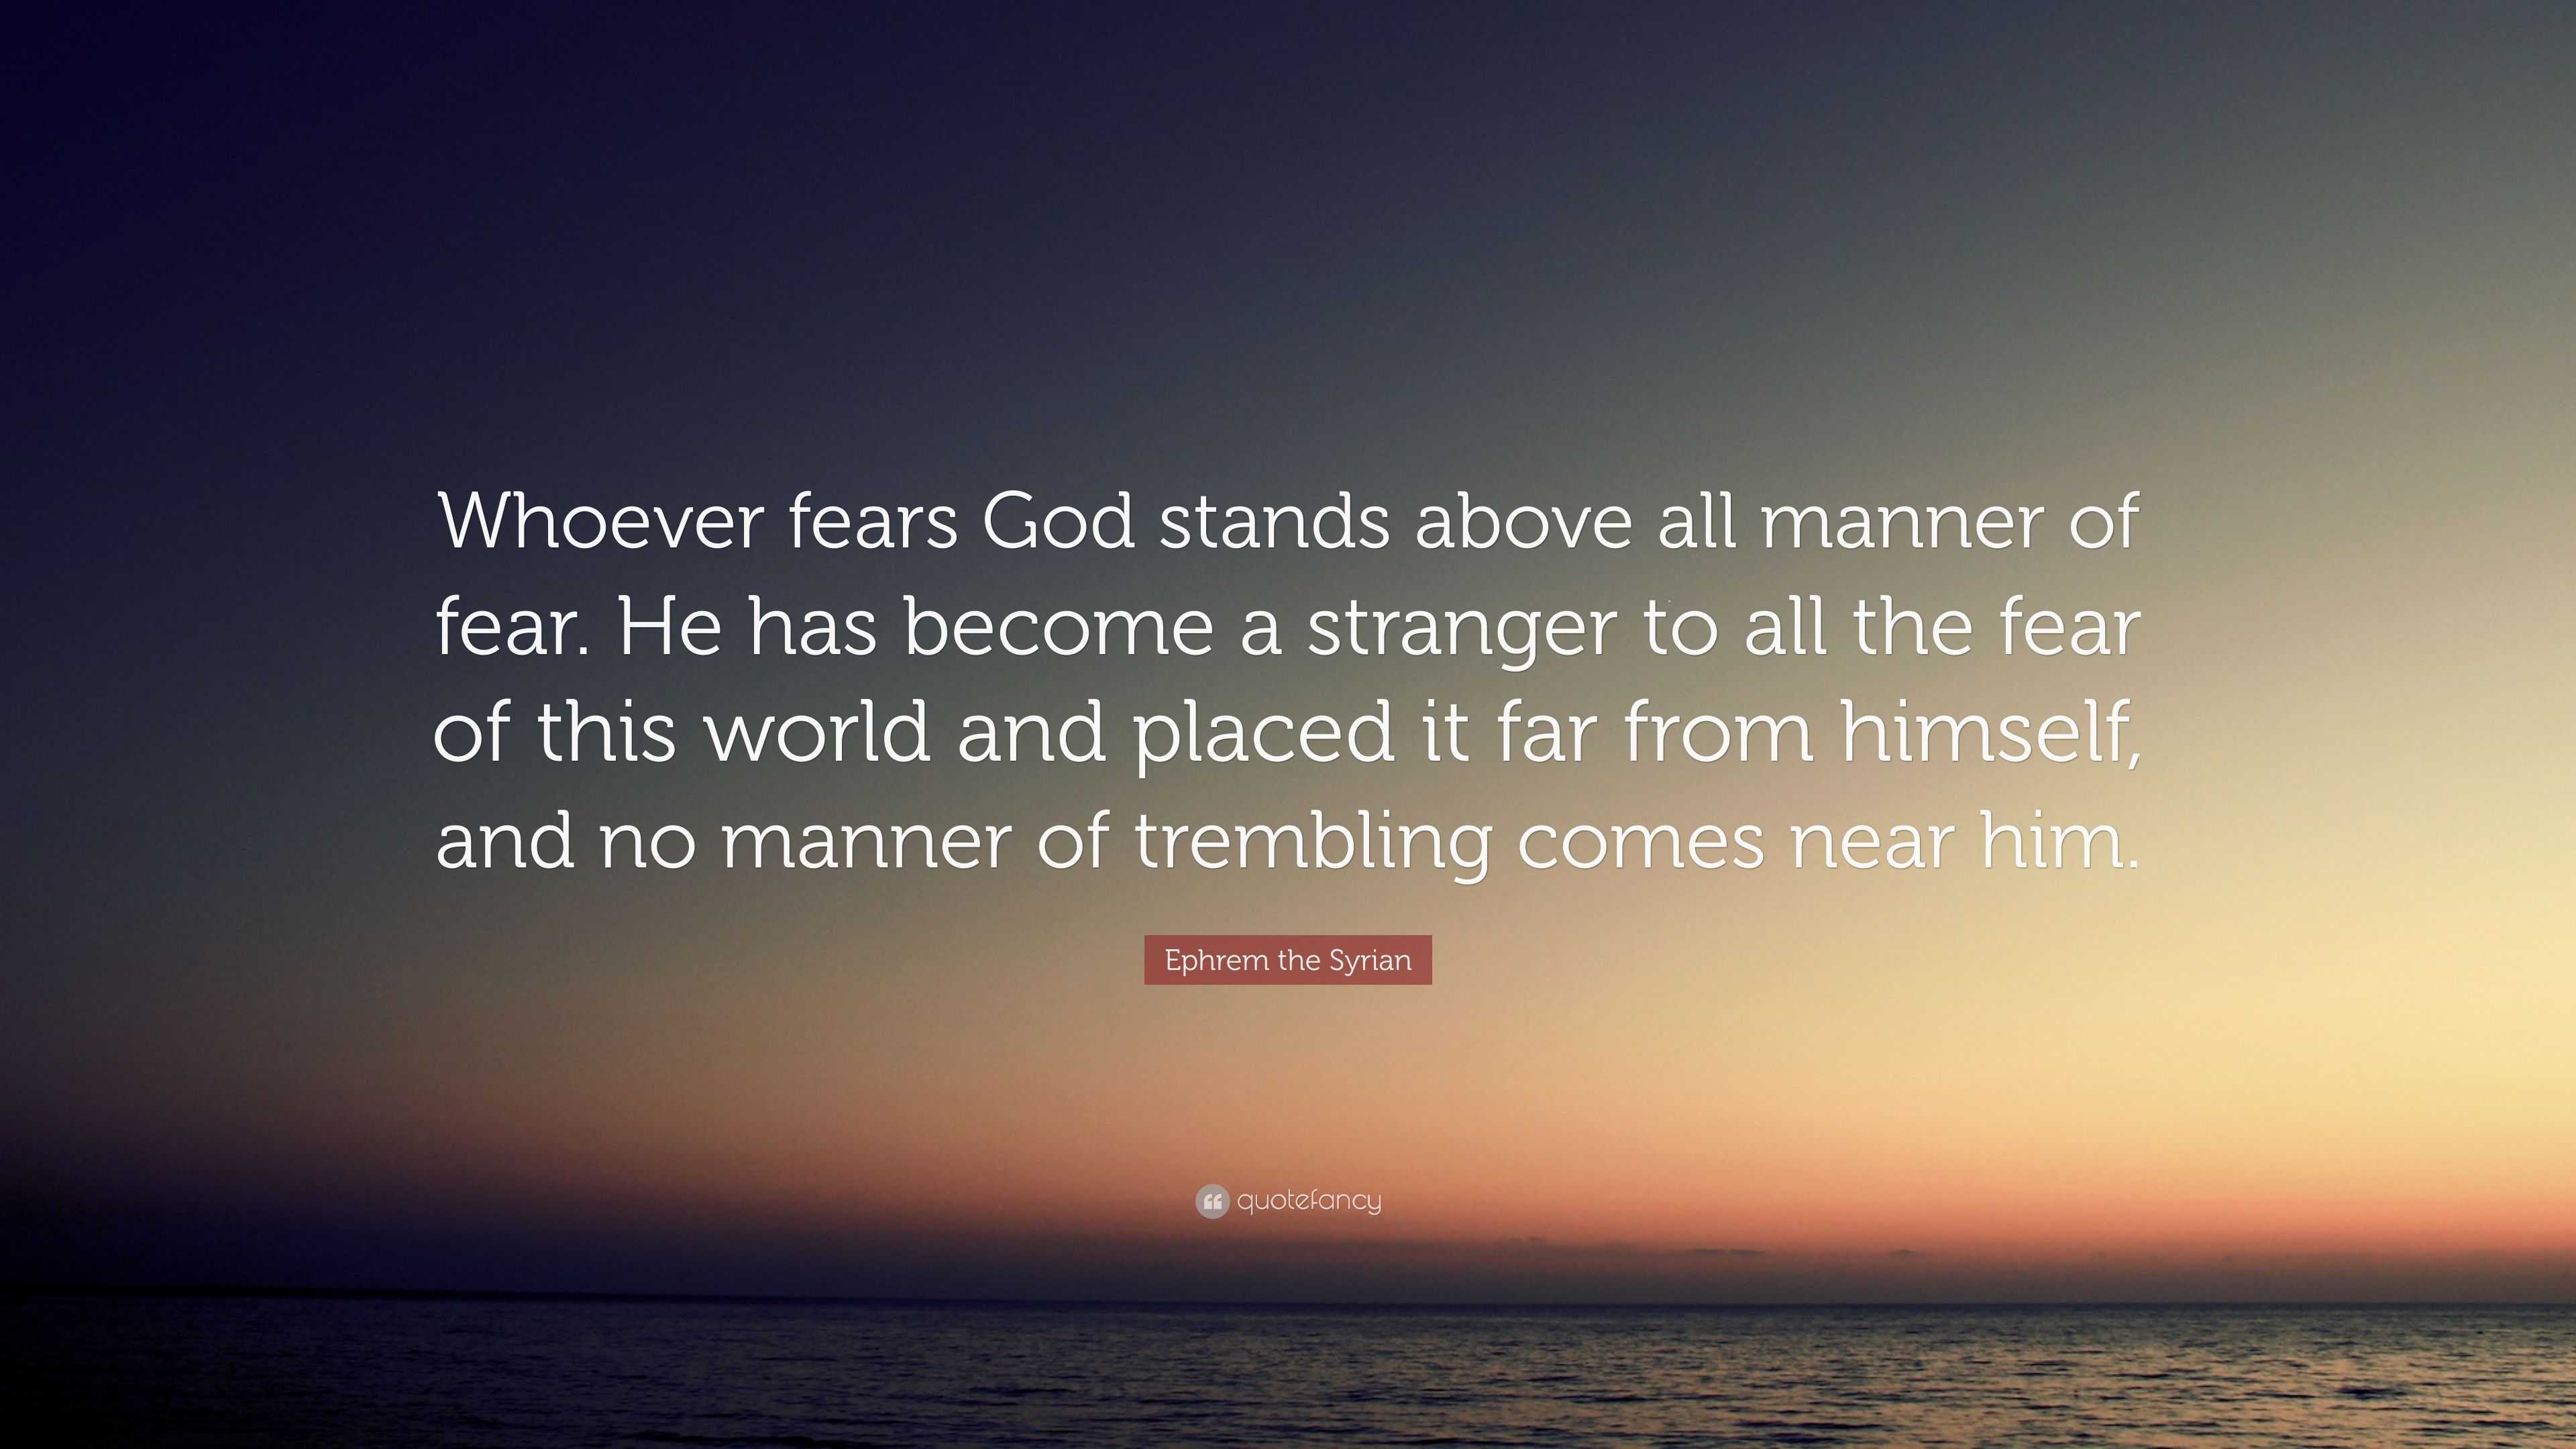 Ephrem the Syrian Quote: “Whoever fears God stands above all manner of ...